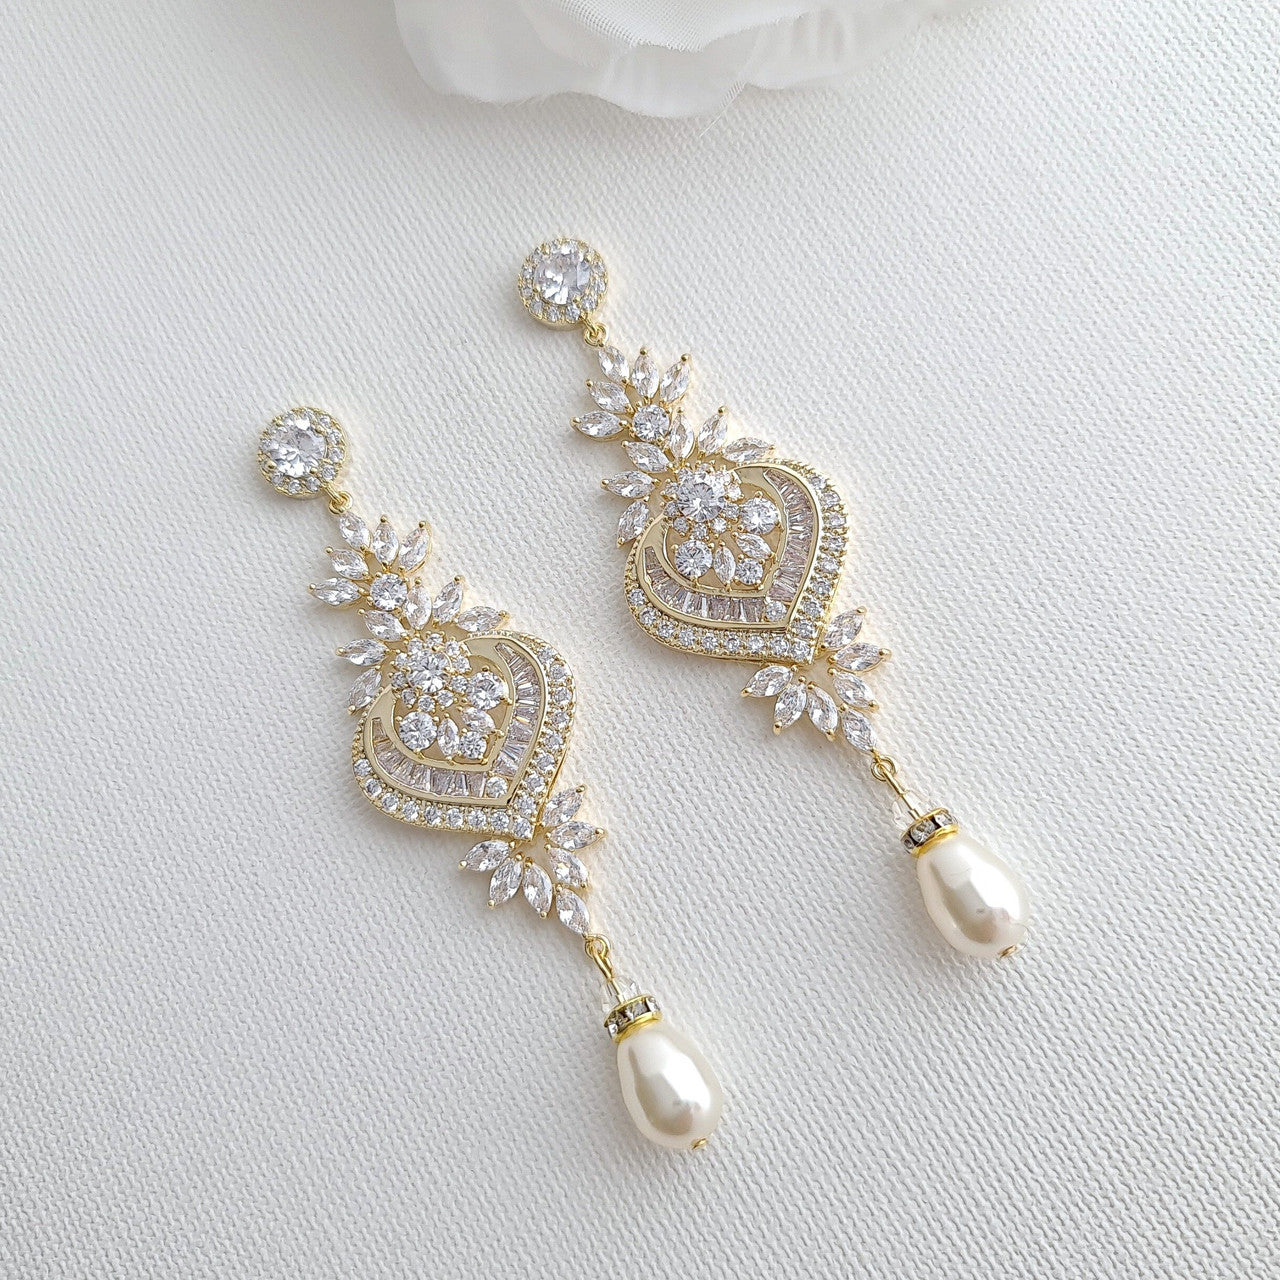 Chandelier Wedding Earrings In gold for Brides- Poetry Designs